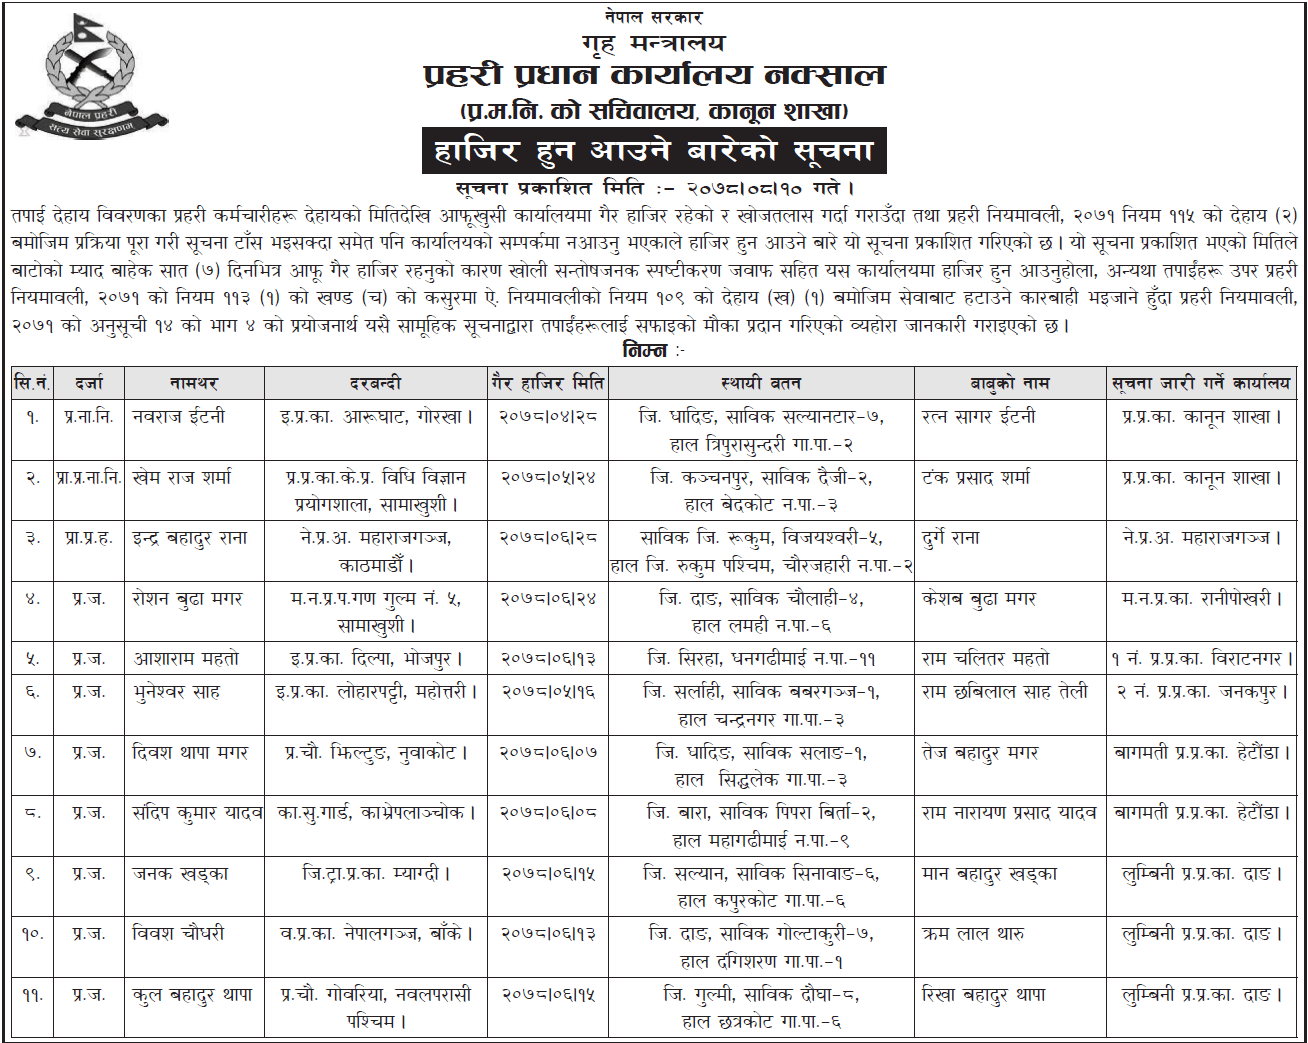 Nepal Police Published Notice of Absent Personnel to Contact within 7 days